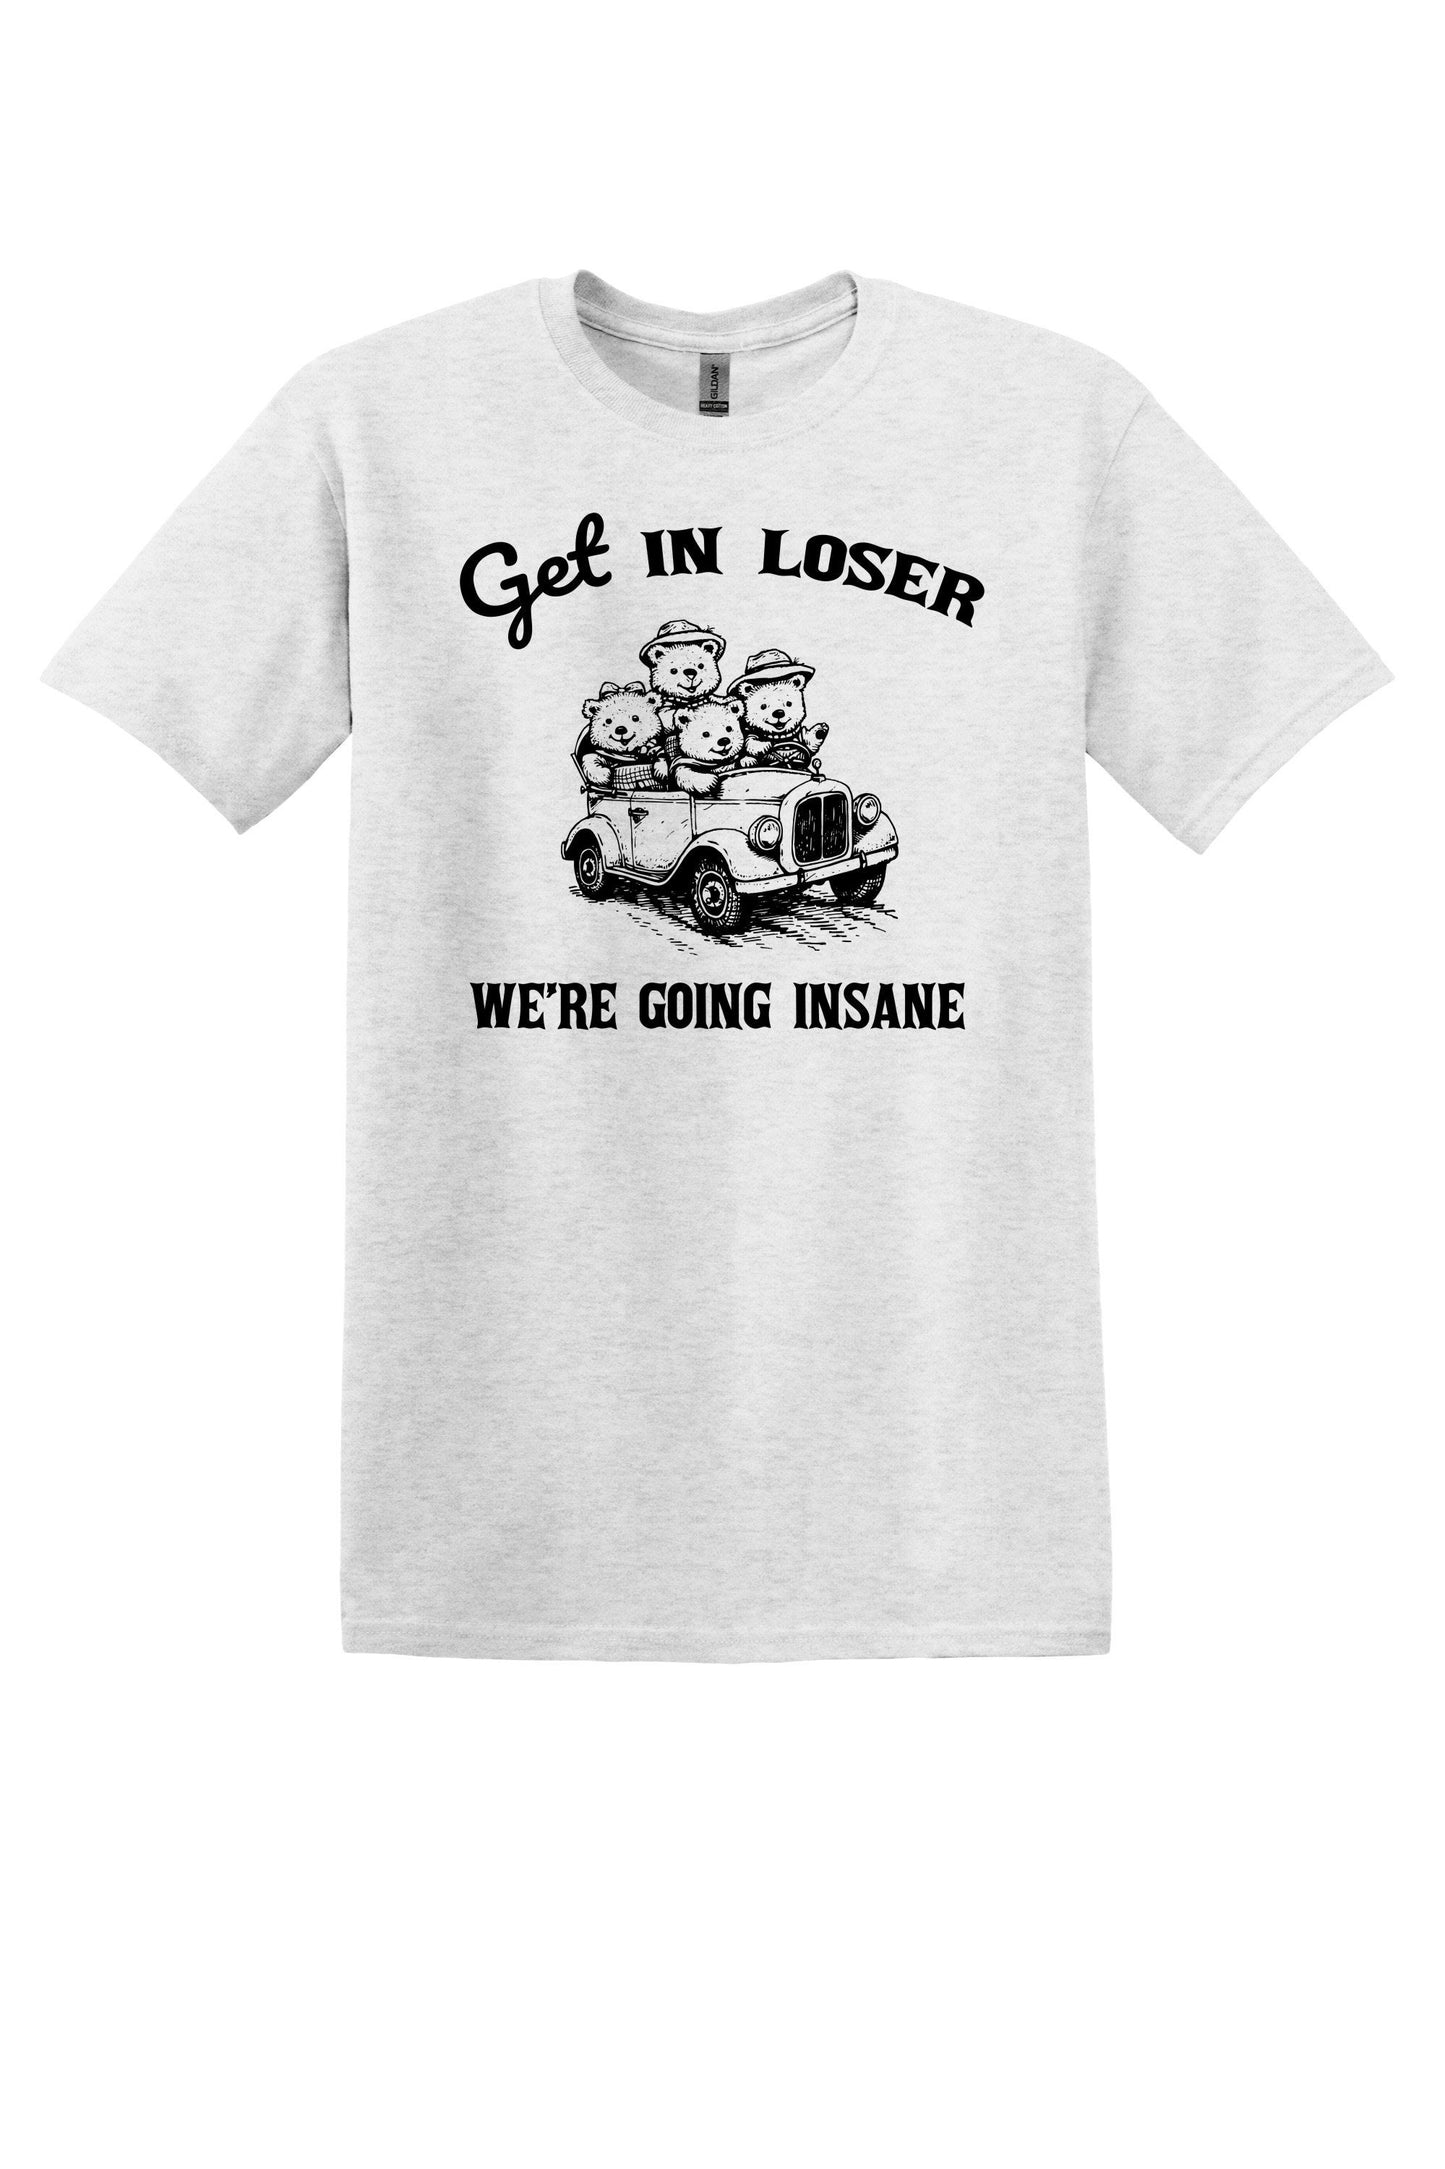 Get in Loser We're Going Insane Shirt Funny TShirt Sarcastic Vintage Graphic Tee Retro Funny Trendy shirt Weird Shirt Graphic Tee